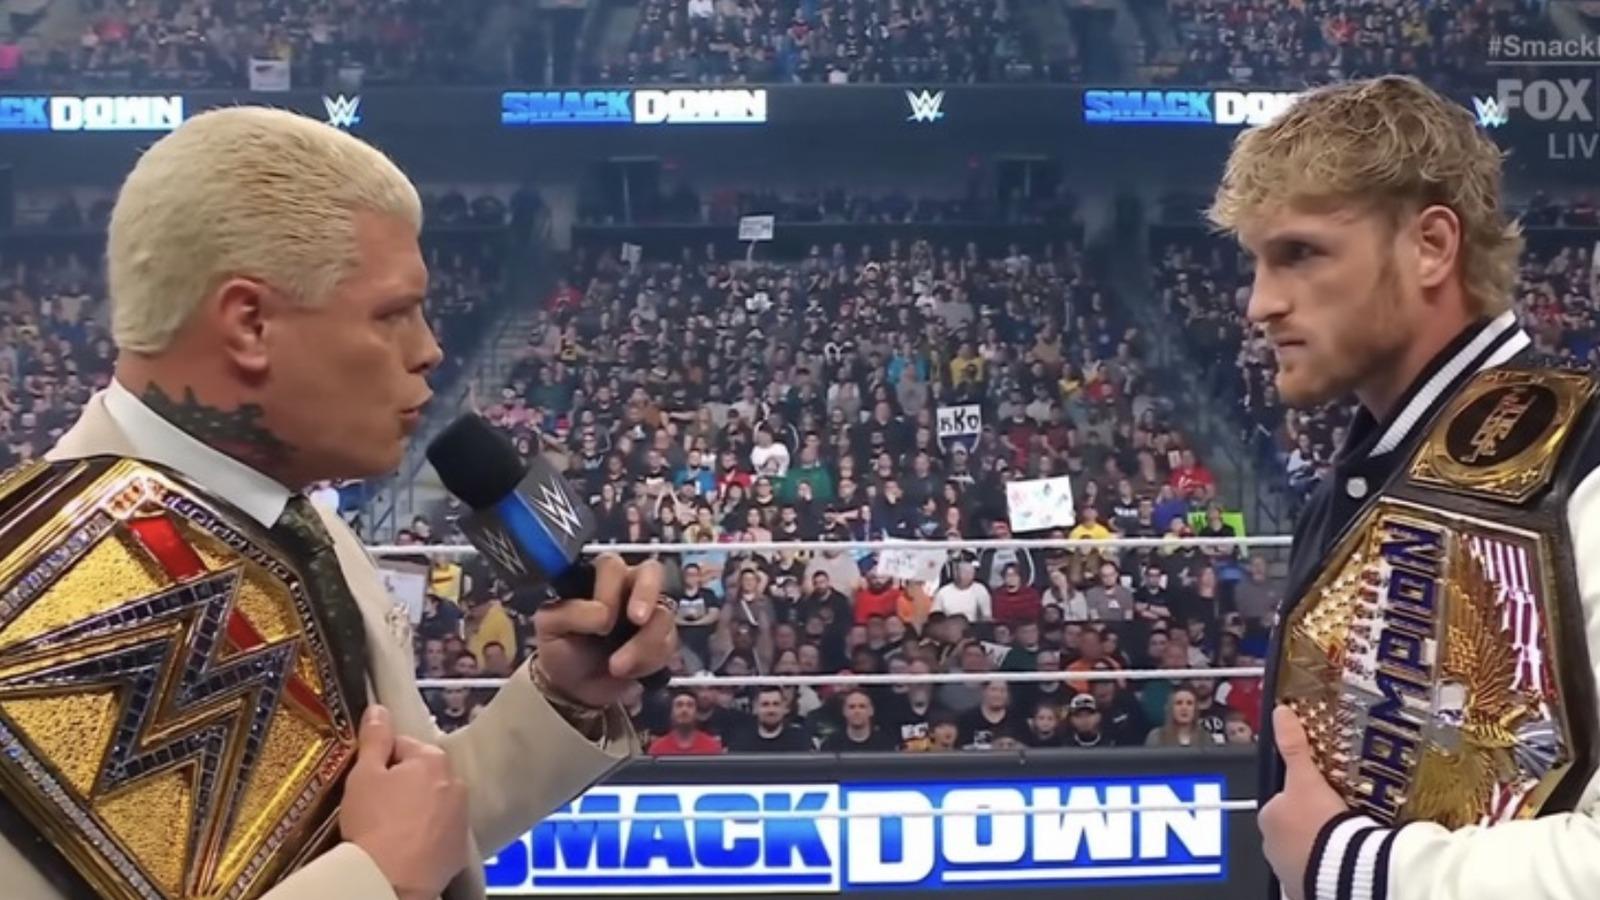 Cody Rhodes and Logan Paul will lock horns at King and Queen of the Ring, but the WWE has painted itself into a corner.